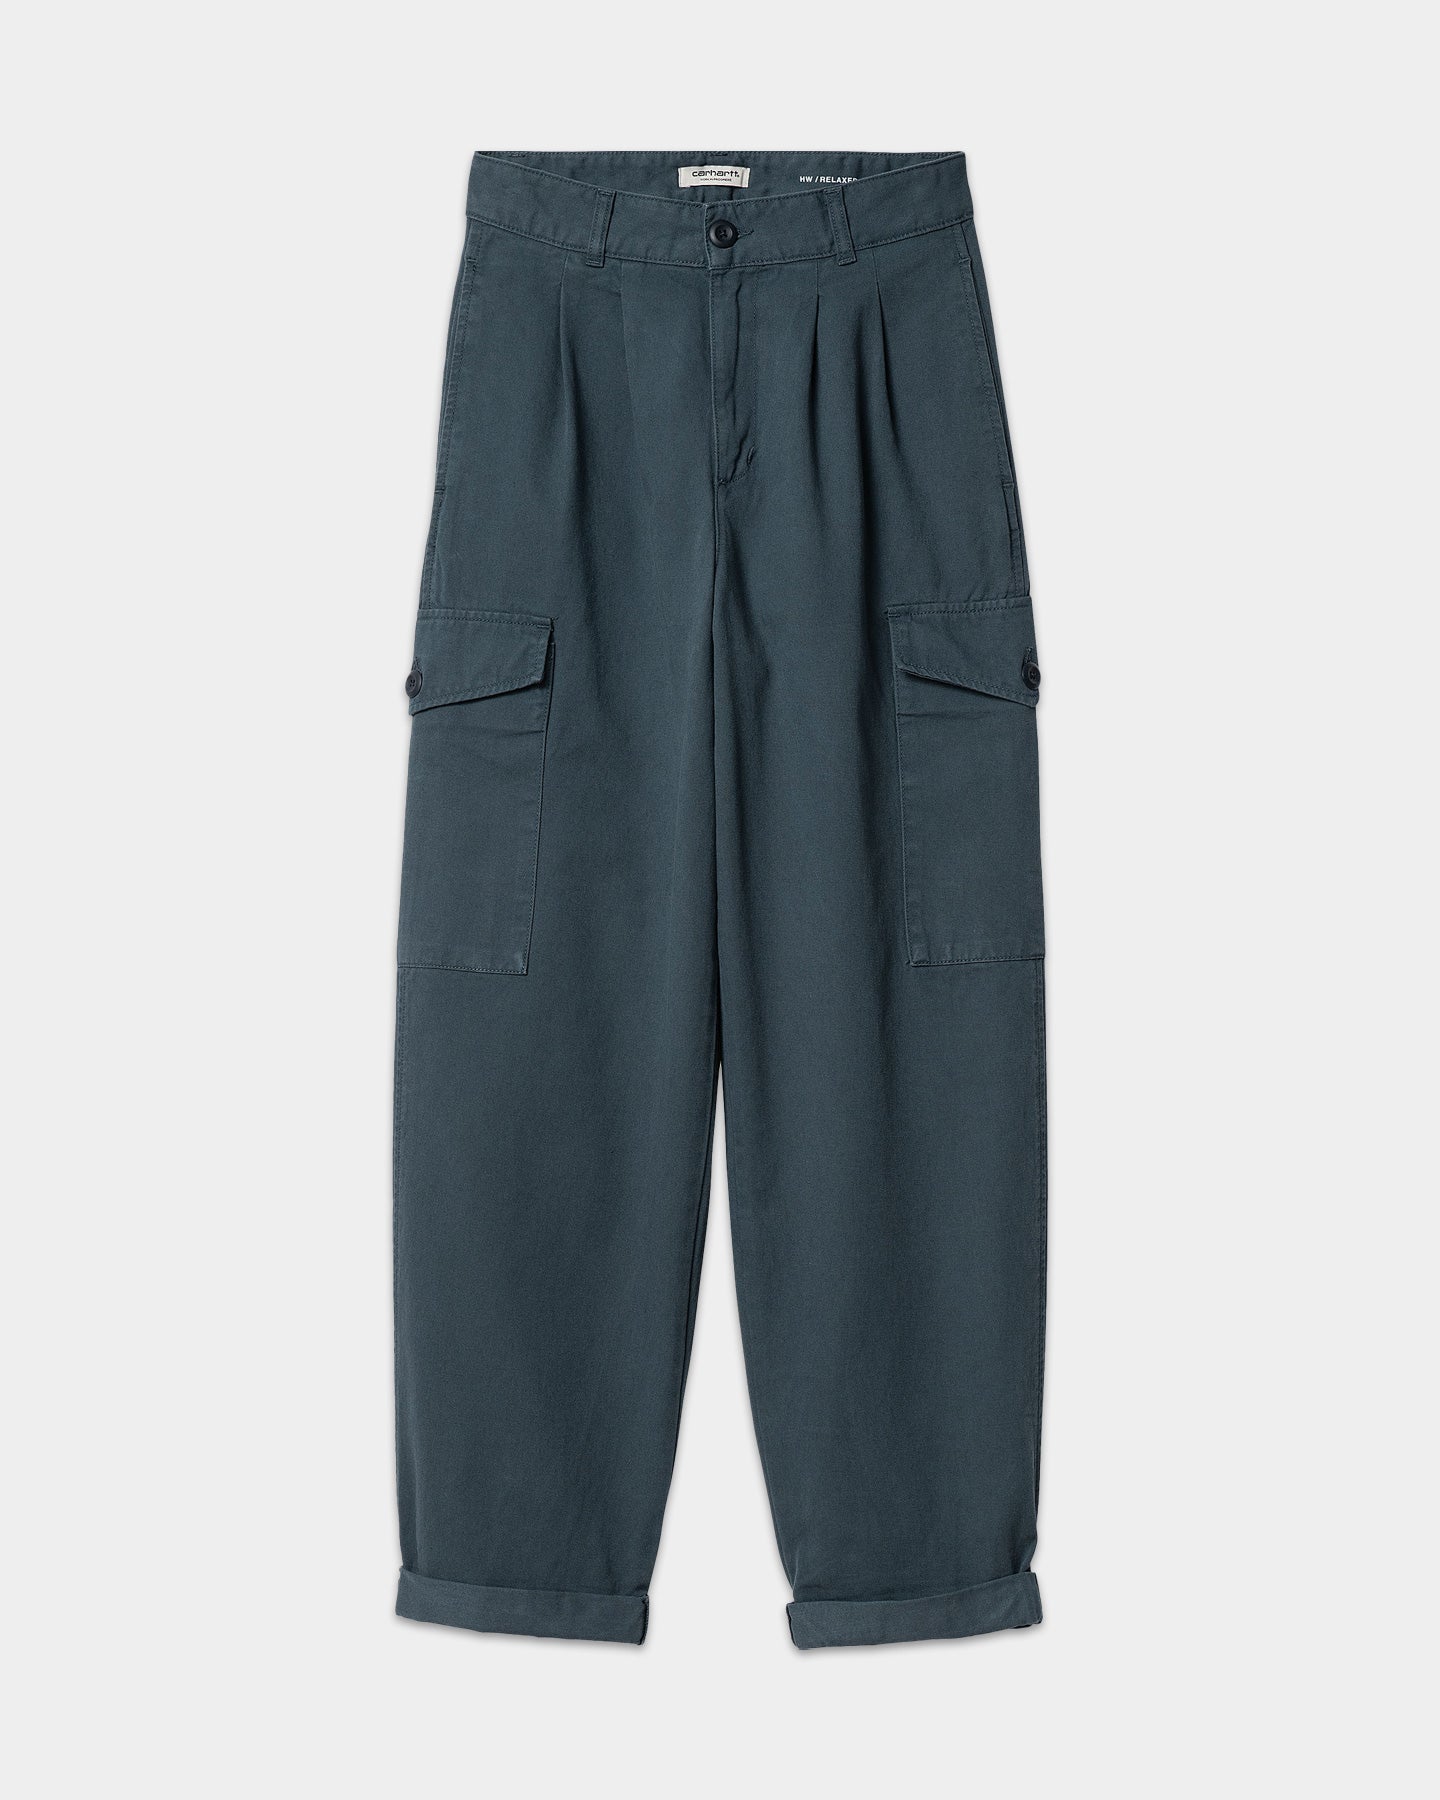 W' COLLINS PANT - ore (garment dyed)